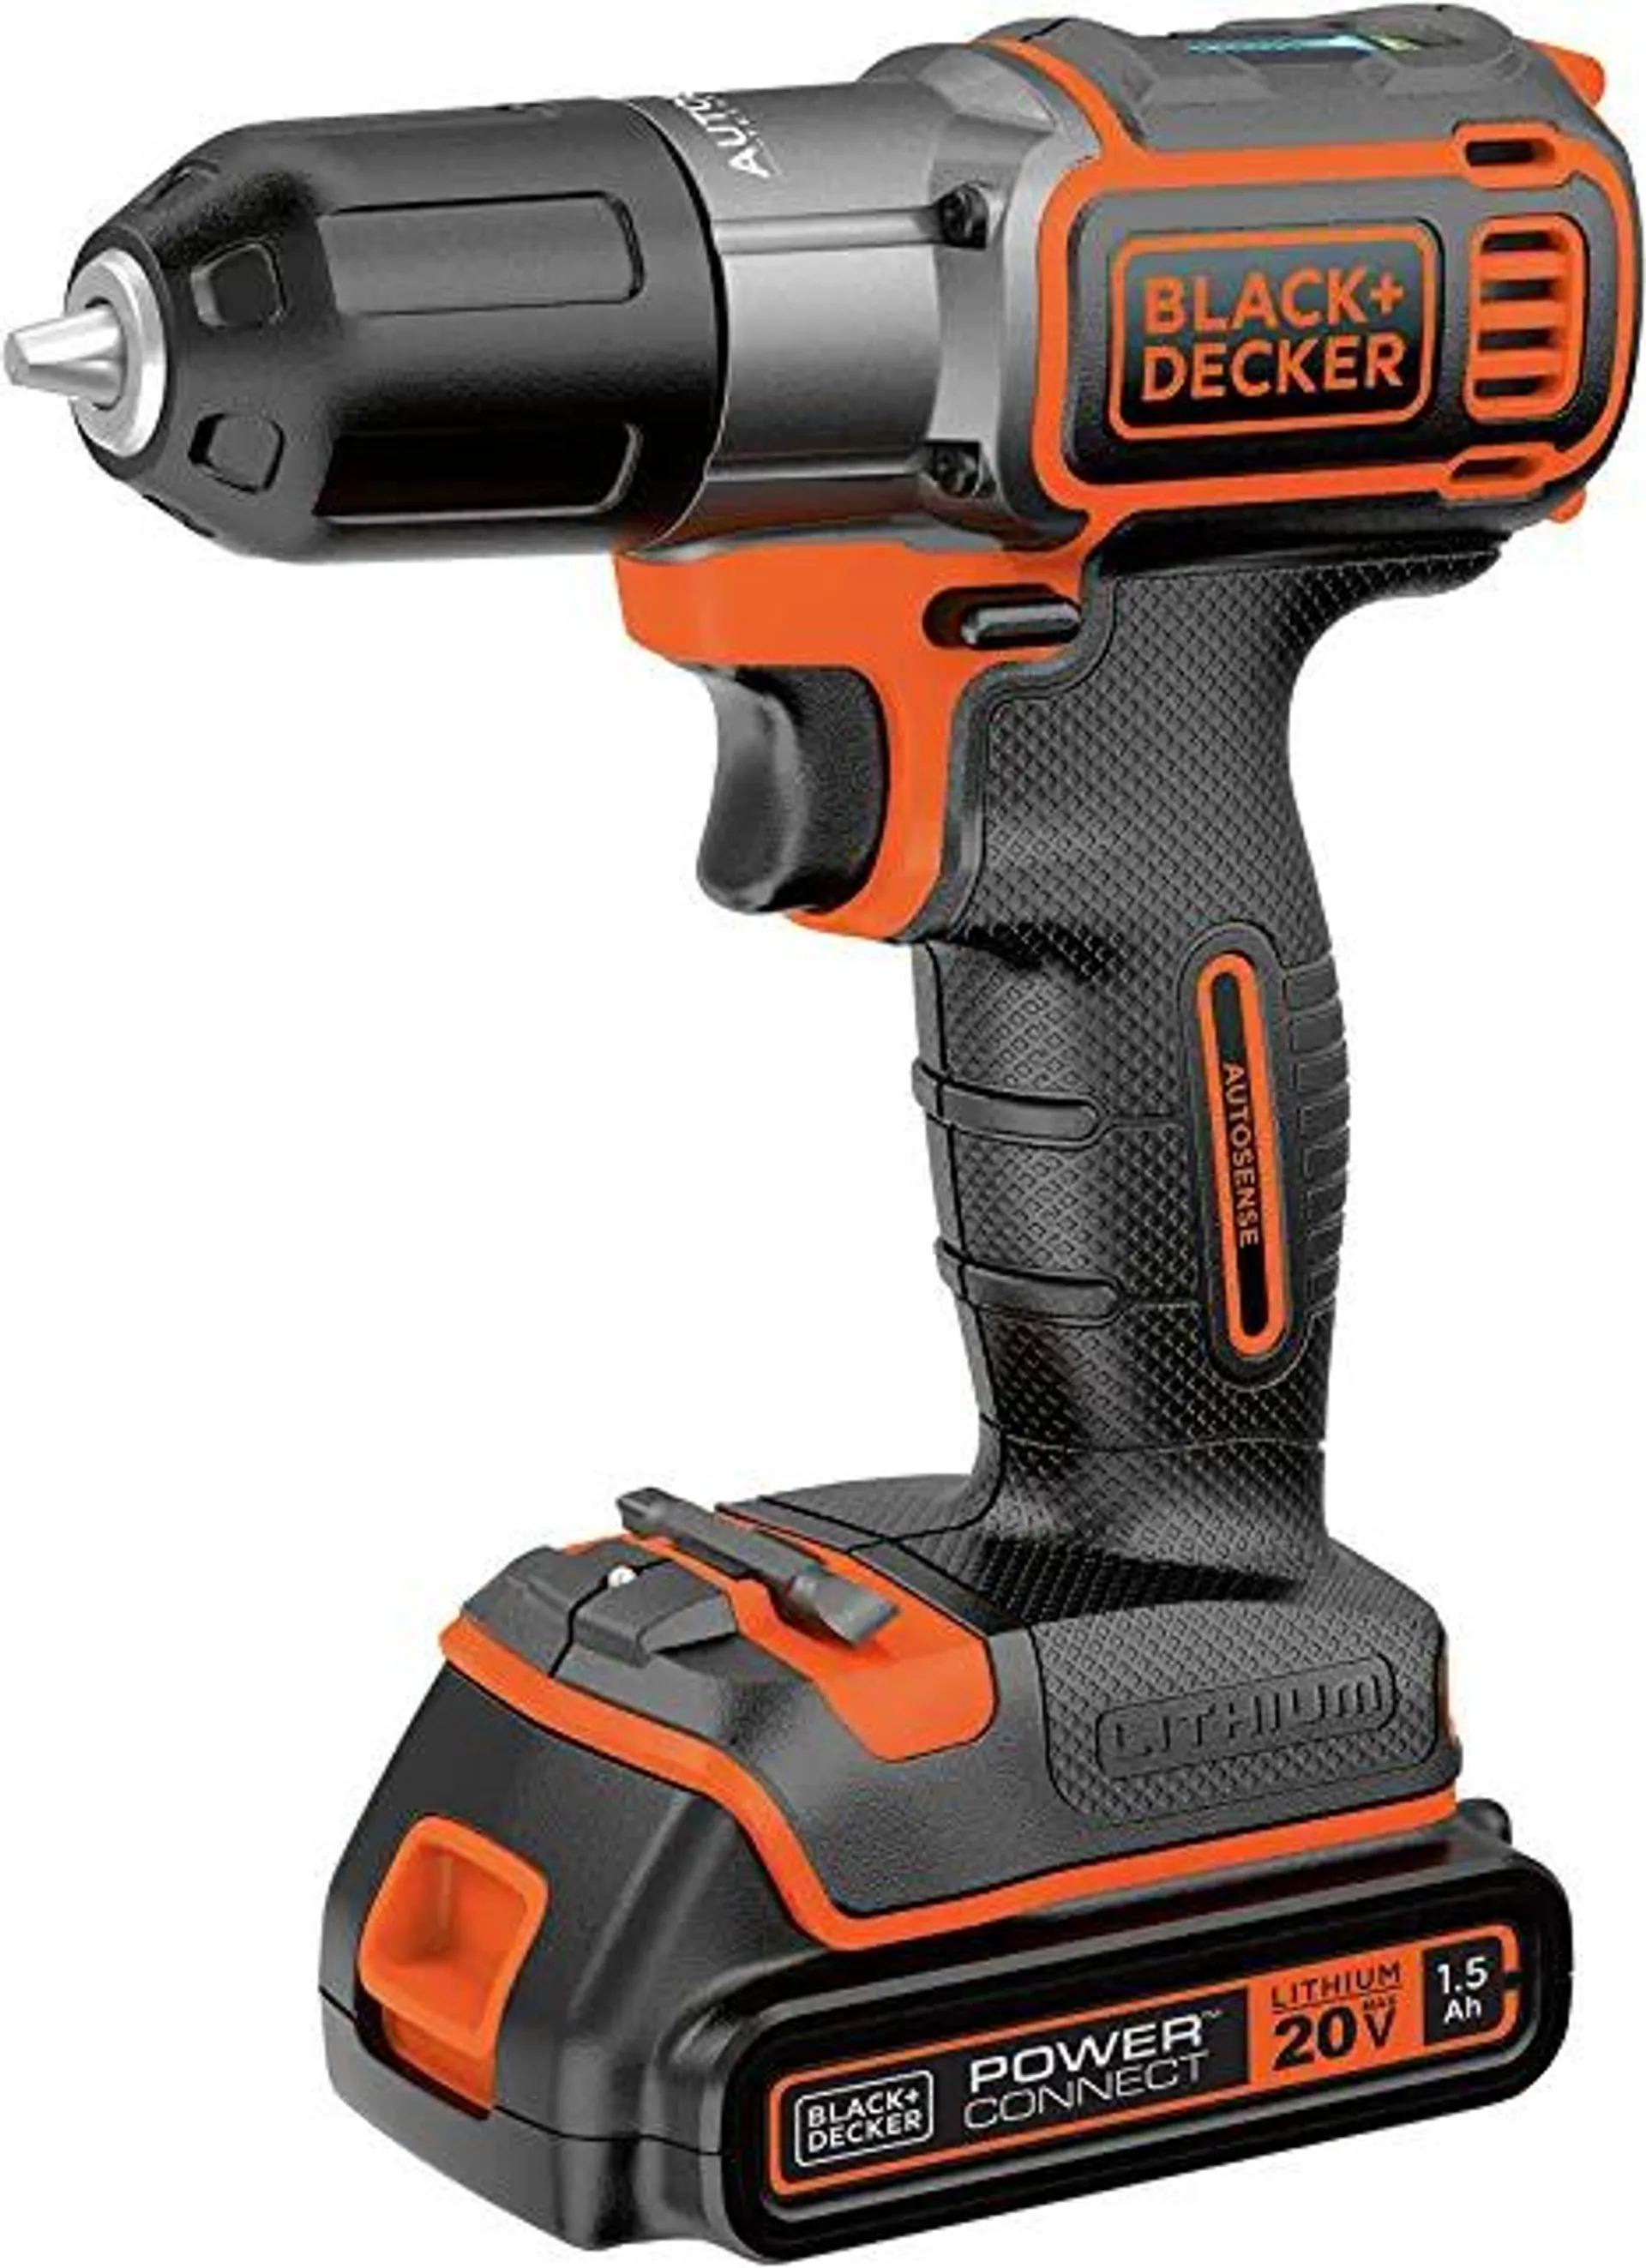 BLACK+DECKER 20V MAX* POWERCONNECT 3/8 in. Cordless Drill/Driver with AUTOSENSE Kit (BDCDE120C)